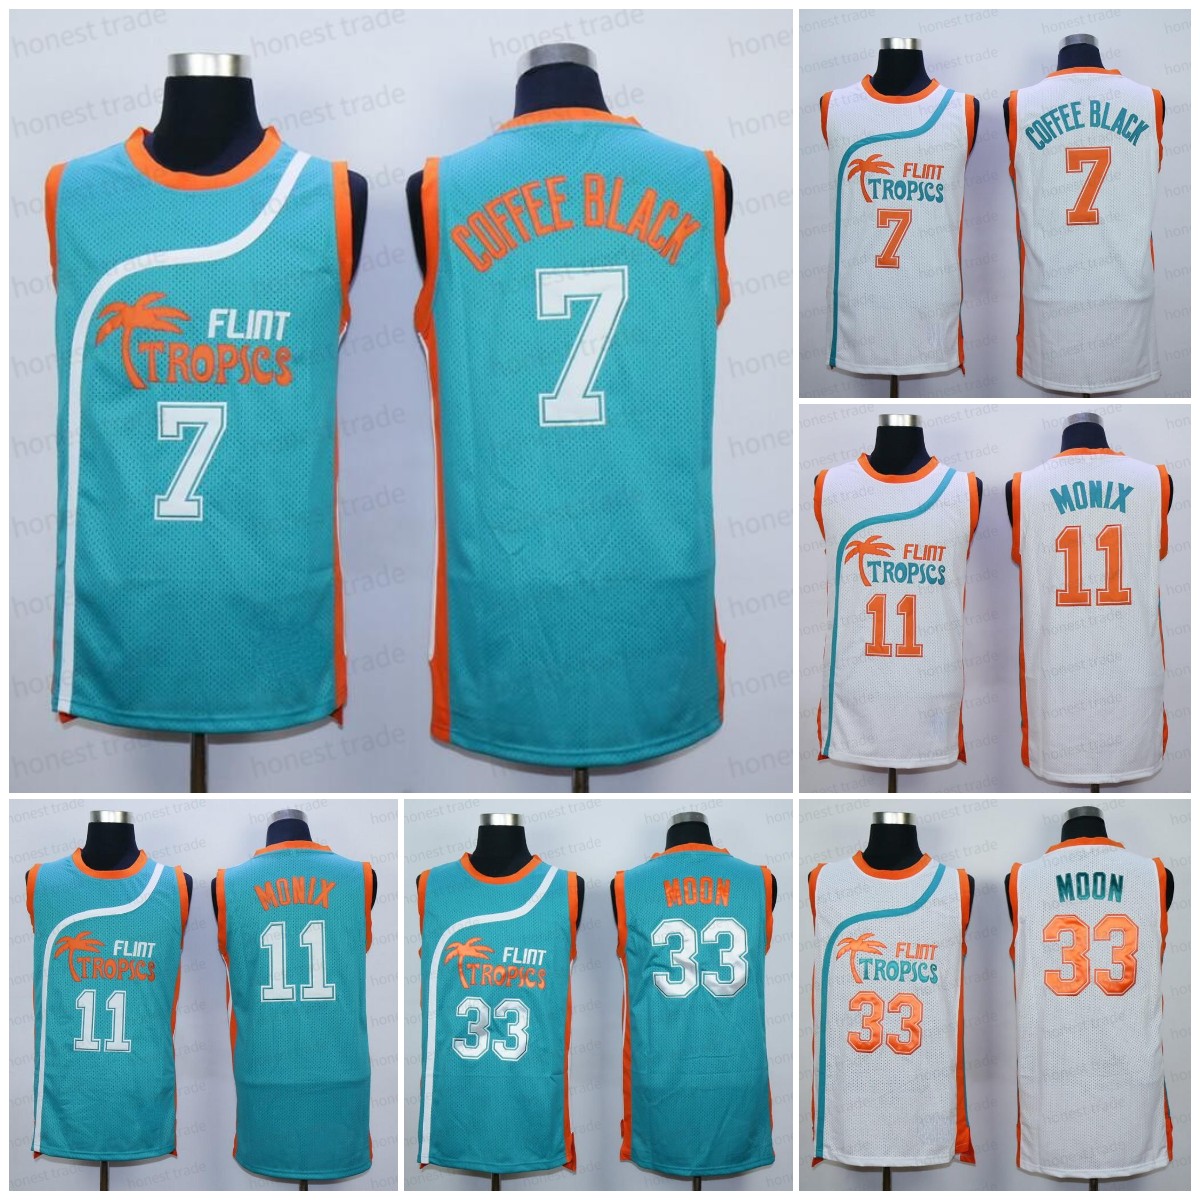 

33 Jackie Moon Men's Semi Pro Movie Flint Tropics #69 Downtown Jersey #11 Ed Monix #7 Coffee Black Embroidery Stitched Jerseys White Green Top Quality, As pic